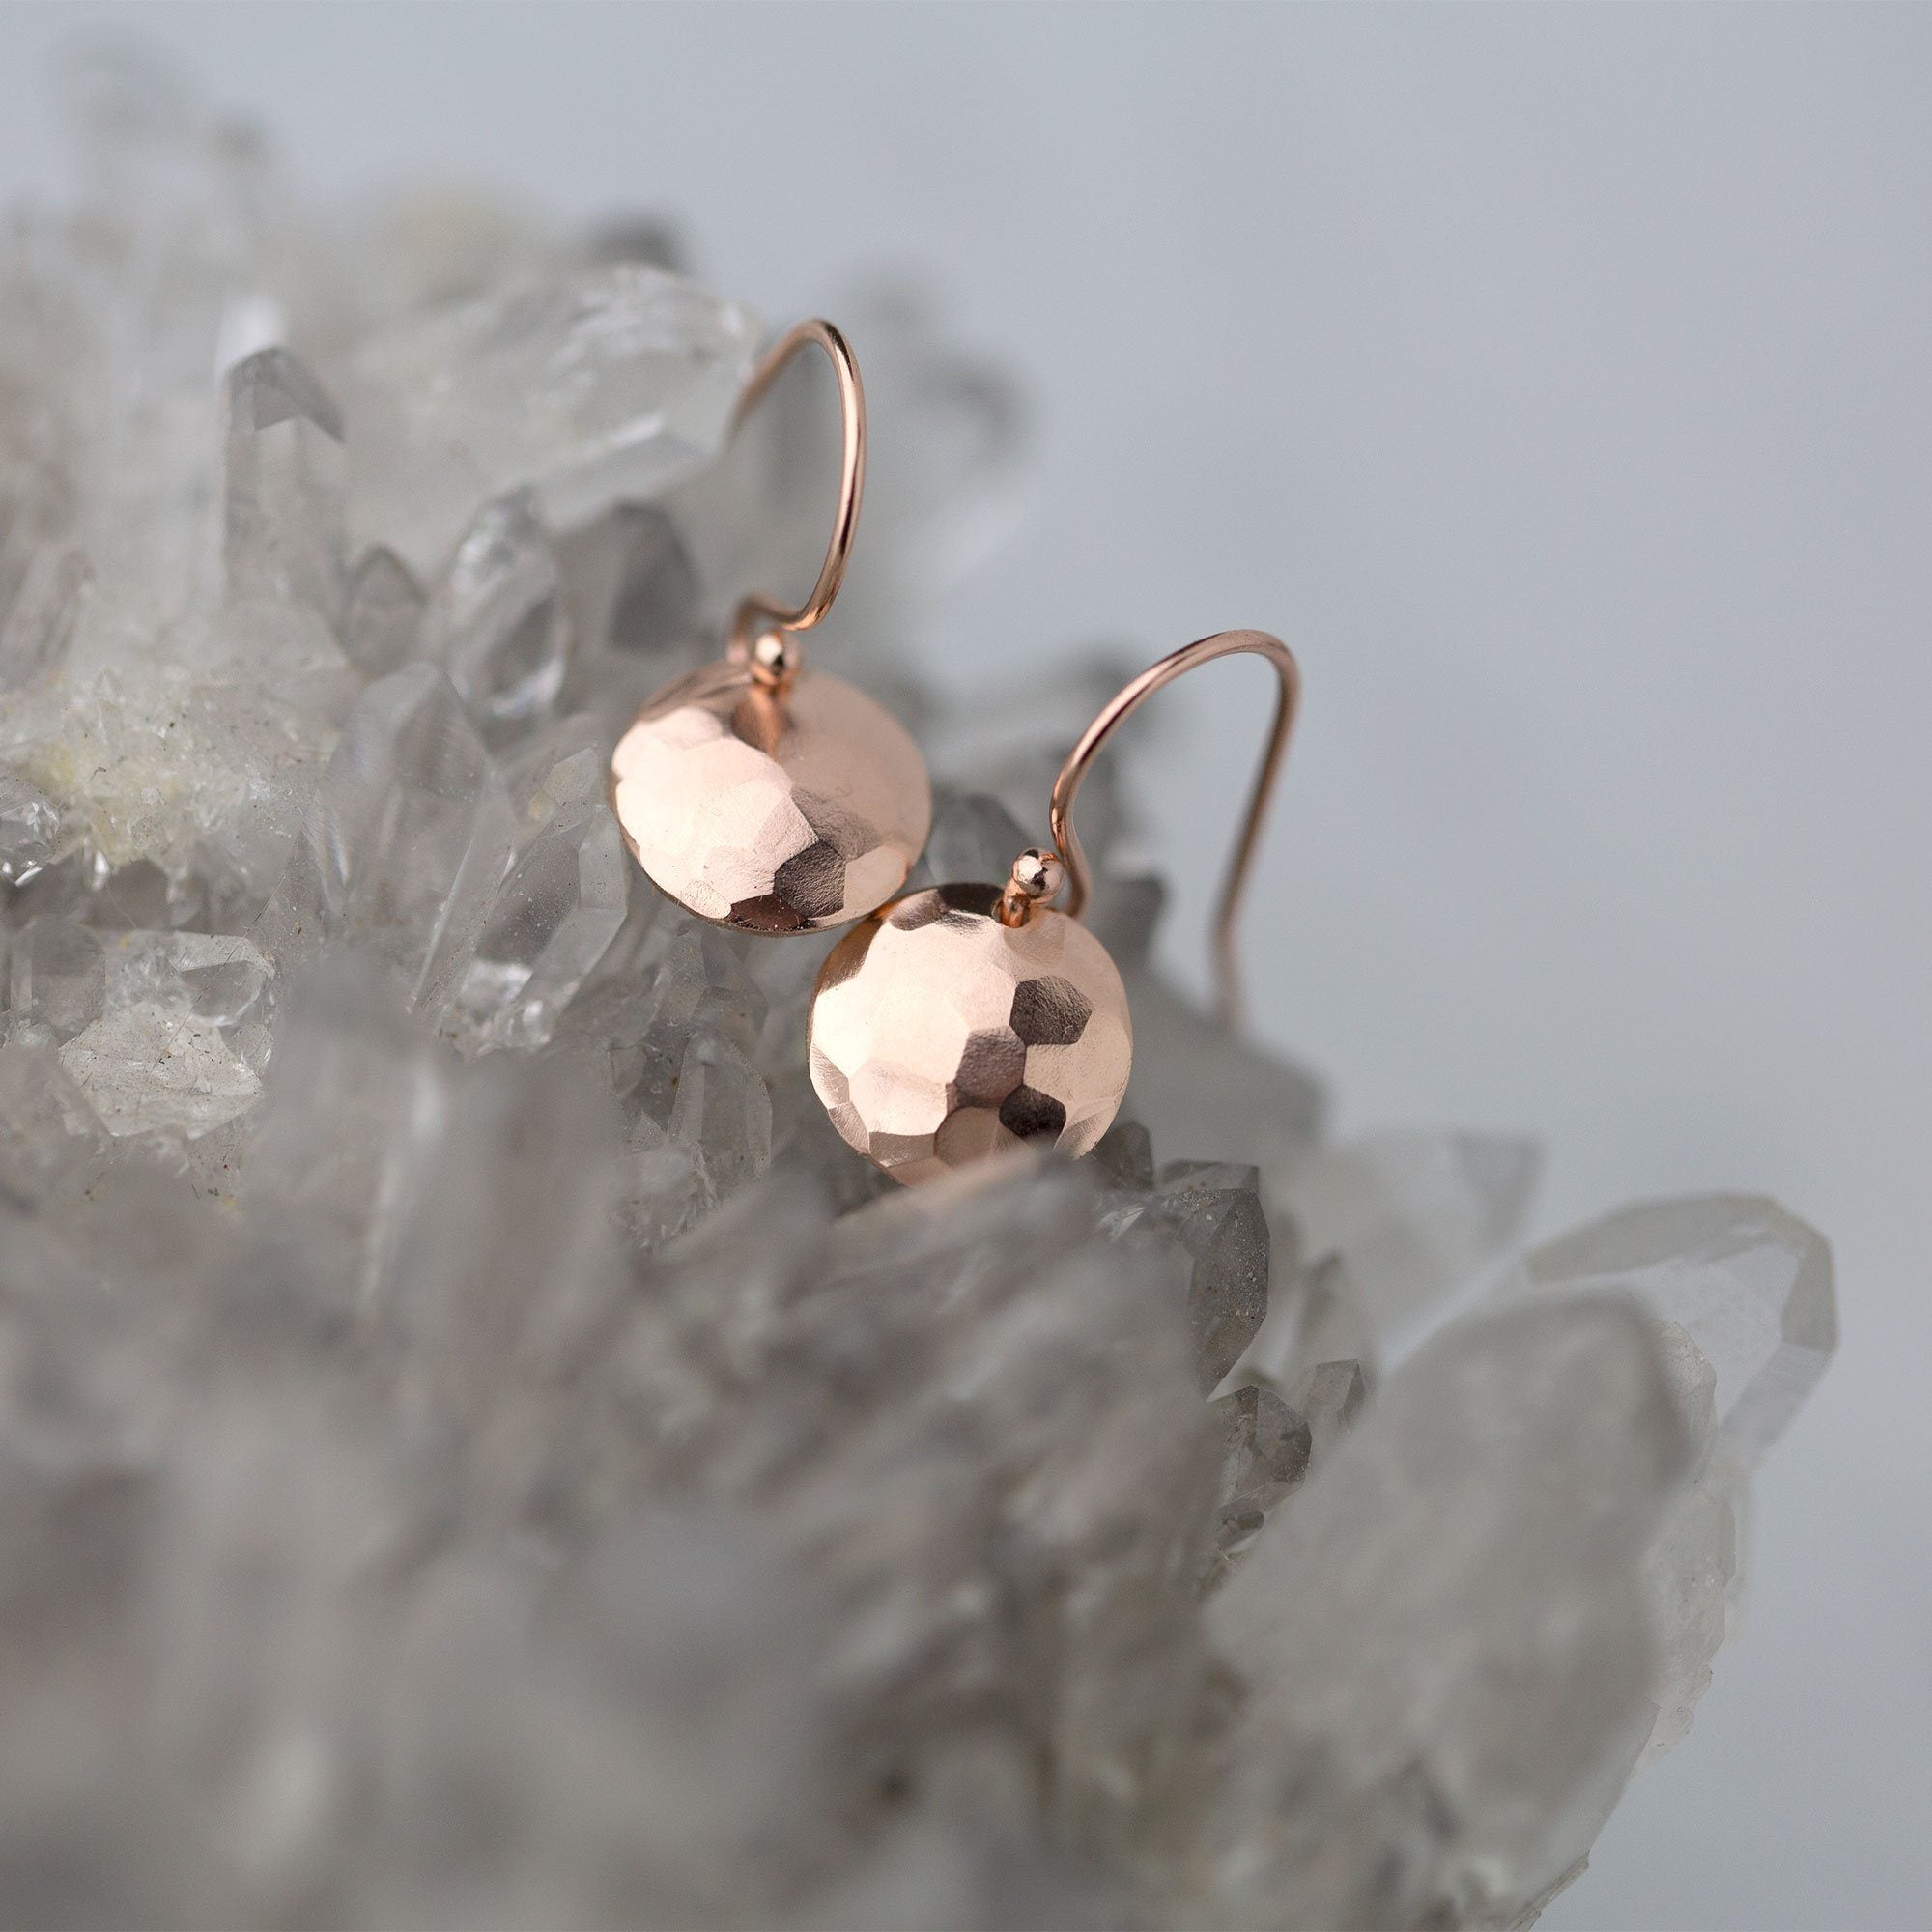 Hammered & Domed Earrings - Rose Gold Fill - Handmade Jewelry by Burnish